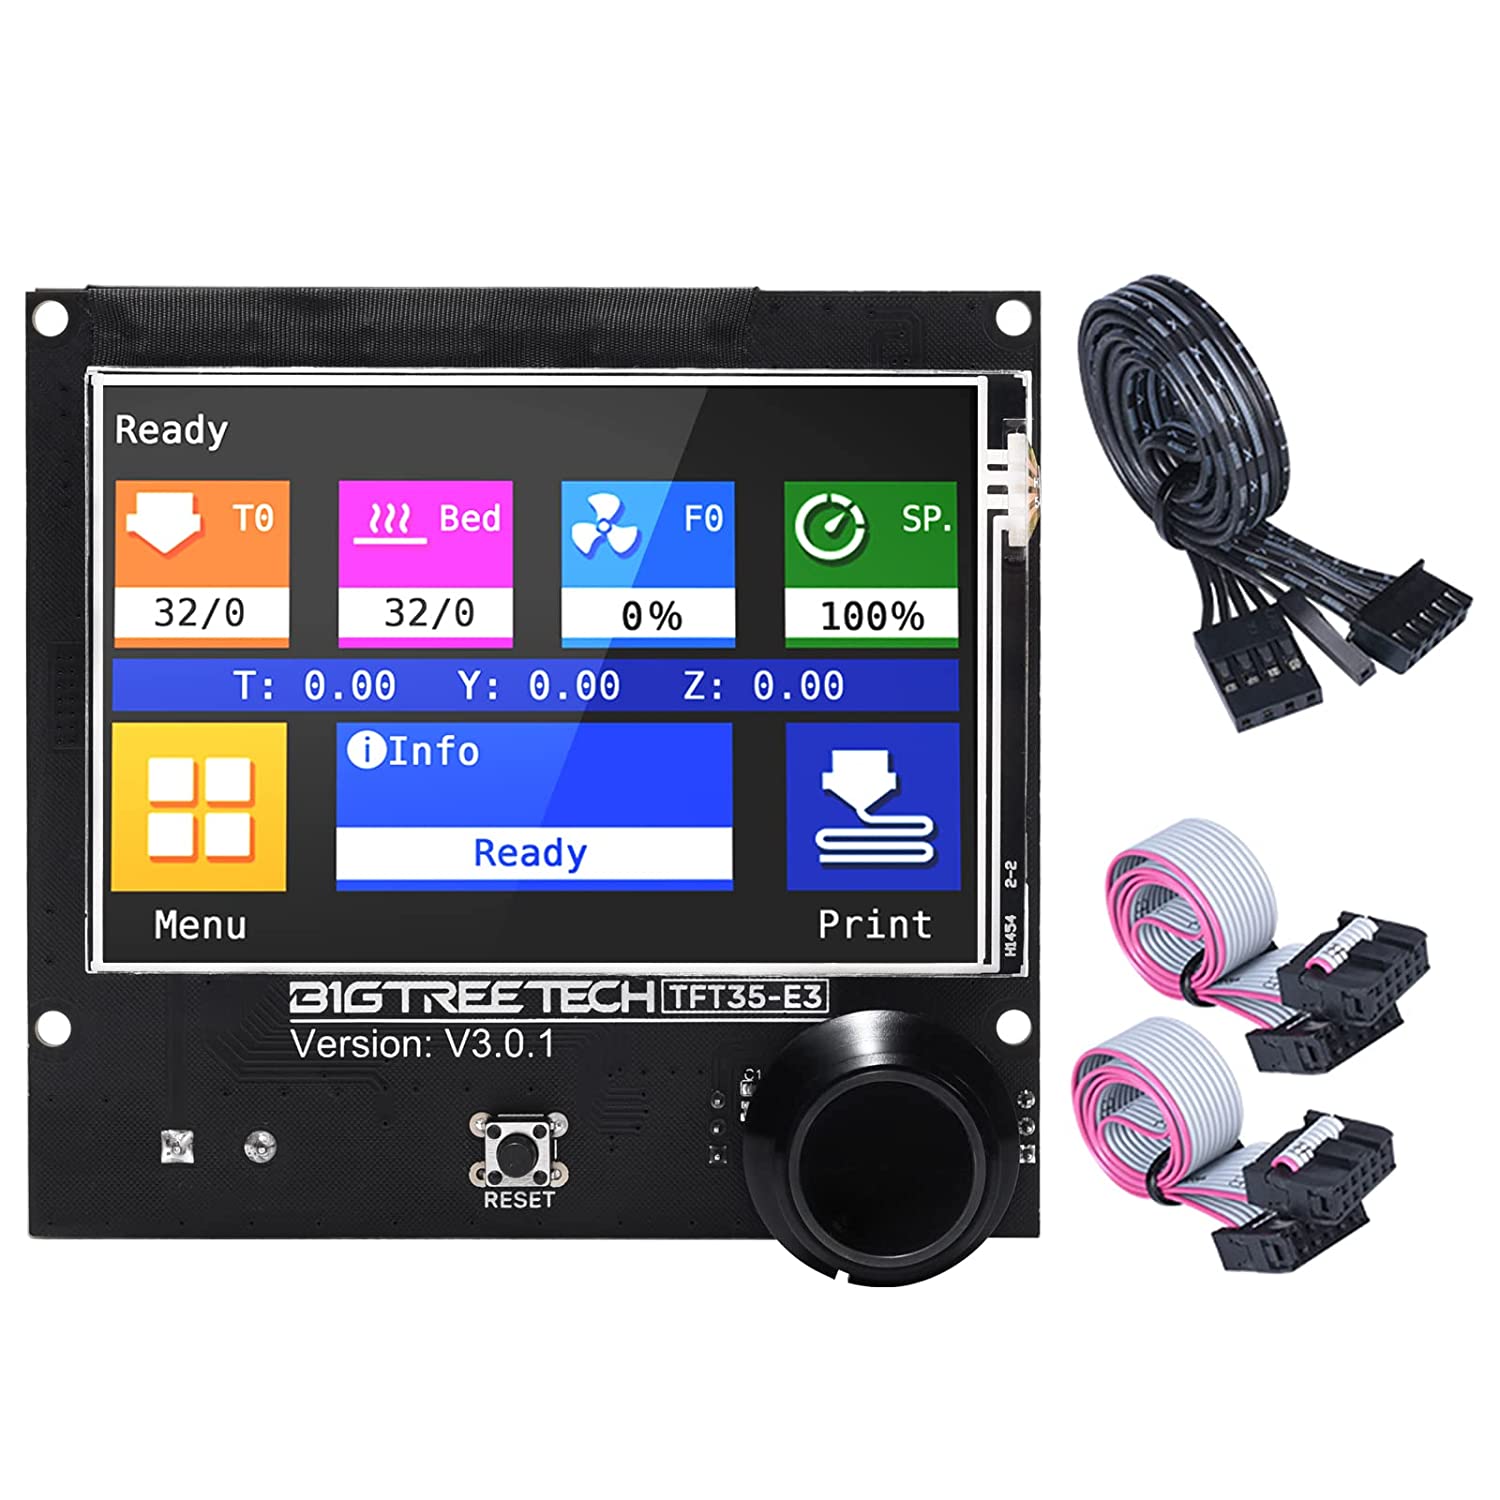 BIGTREETECH TFT35 E3 V3.0.1 Touch Screen Display